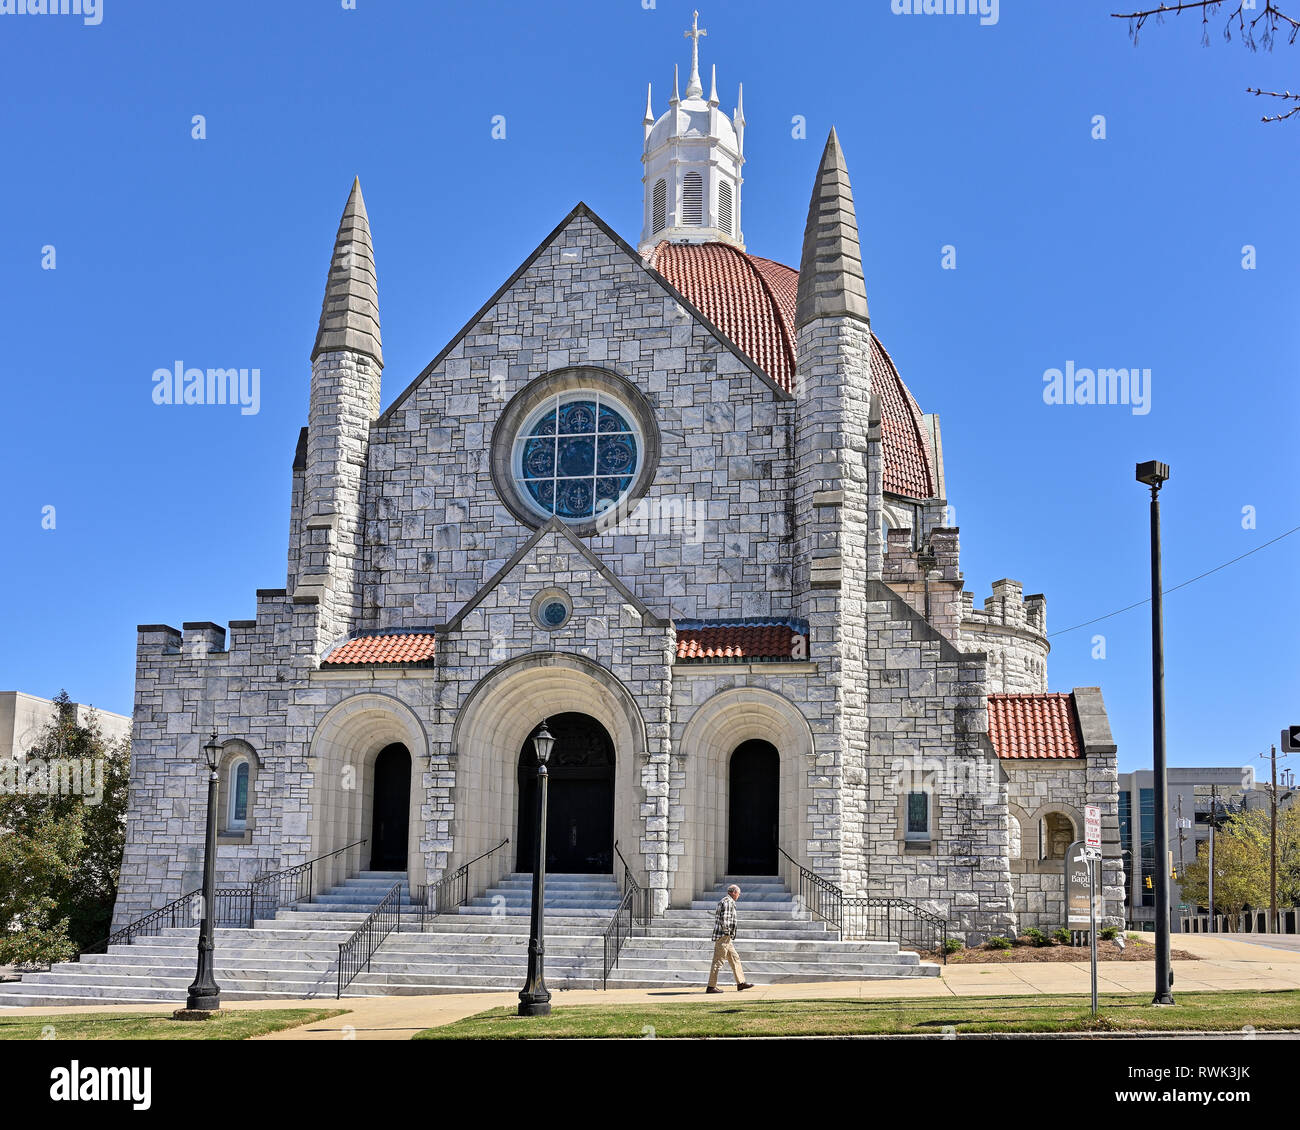 First Baptist Church, a large stone church patterned after Italian design a symbol of christian religion or protestant faith in Montgomery AL, USA. Stock Photo